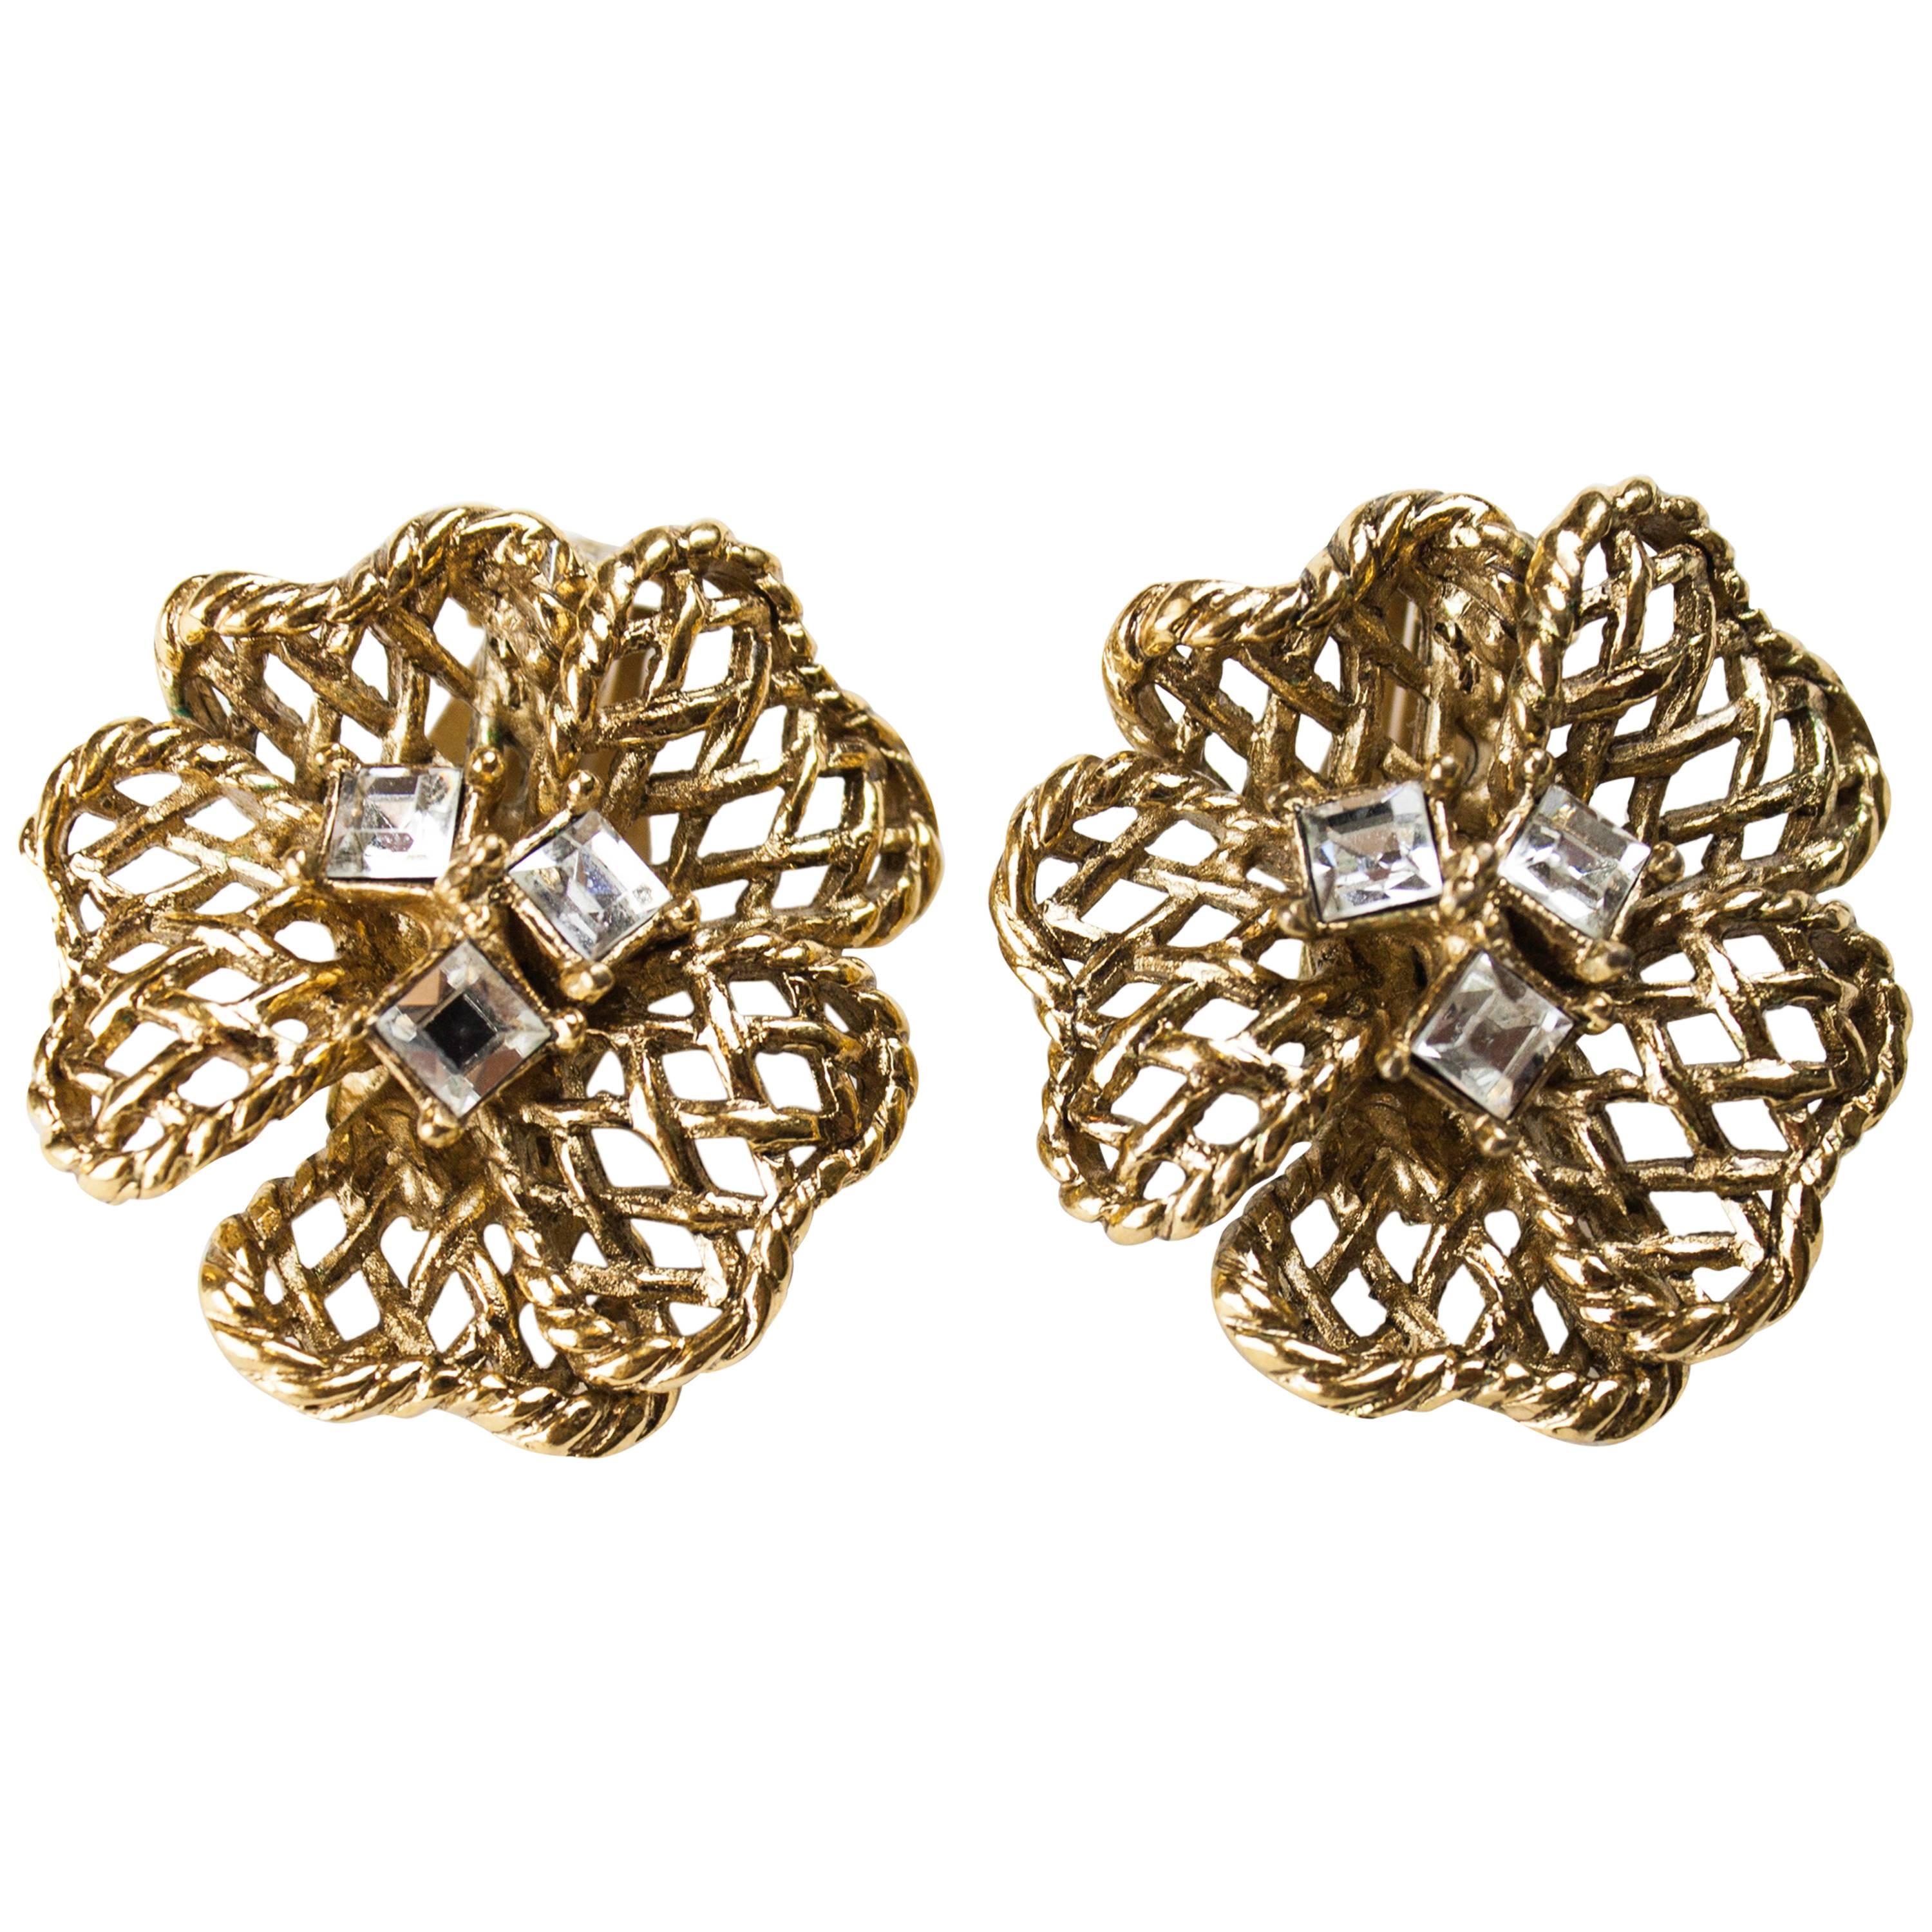 Christian Dior gold-plated flowers earrings. Circa 1977